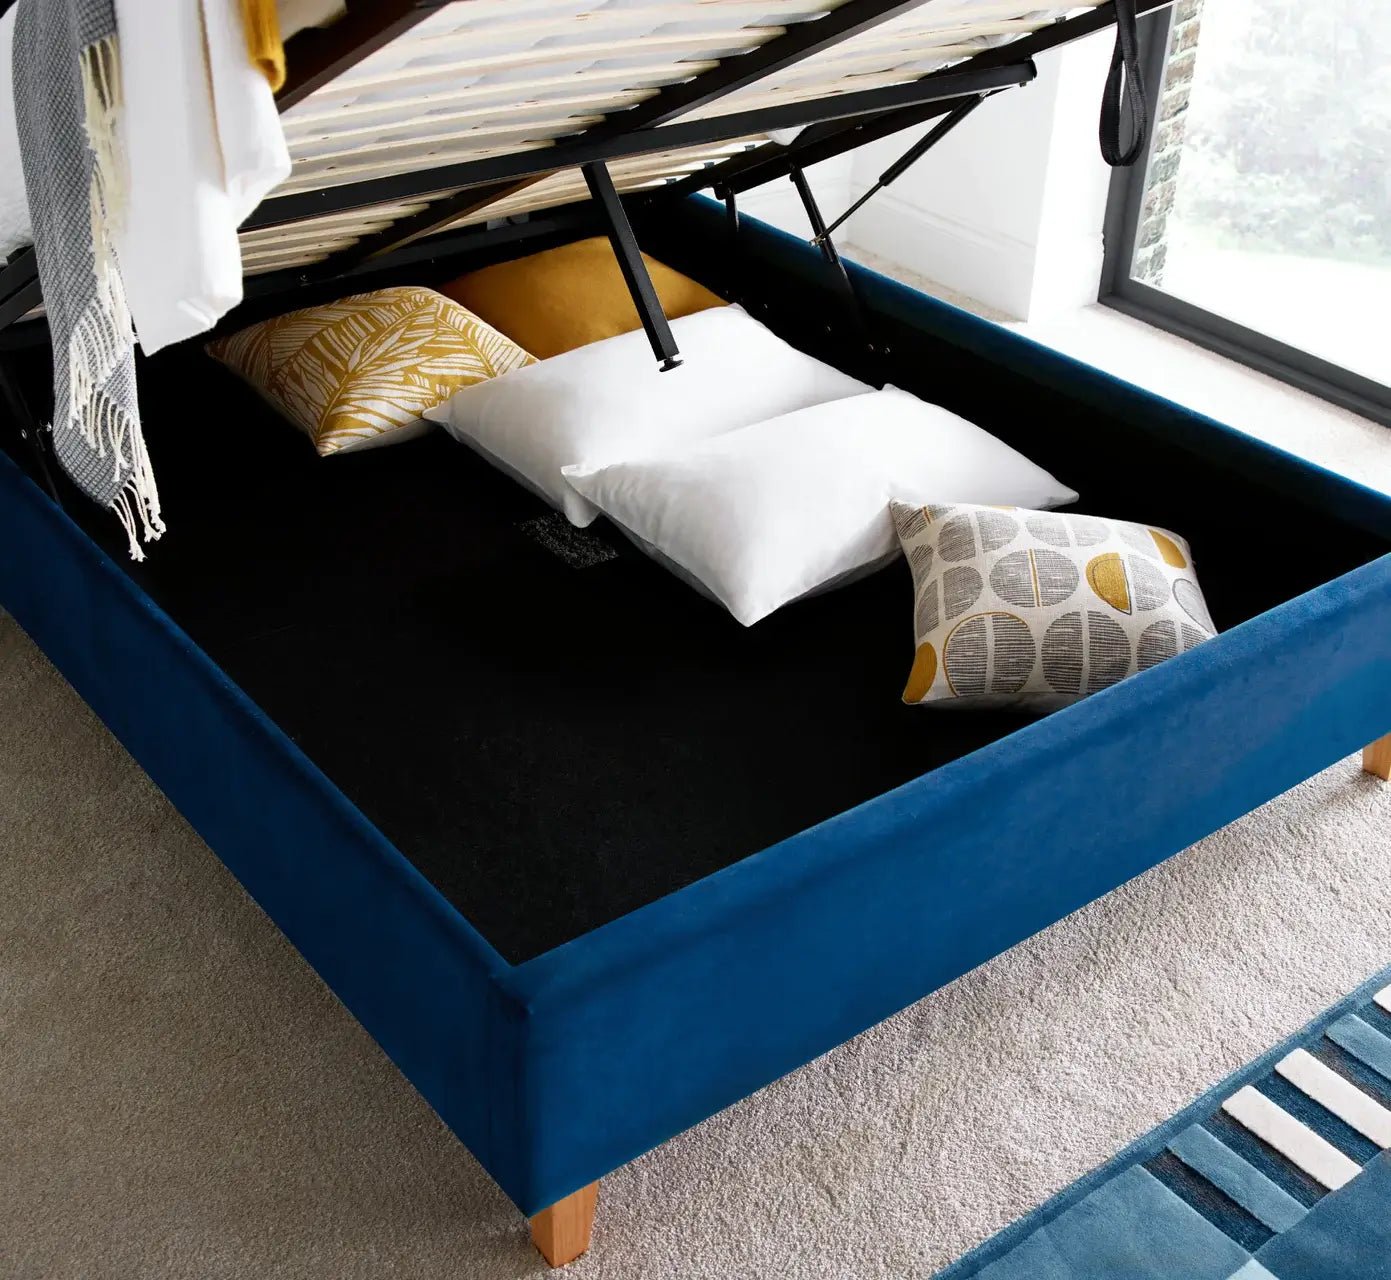 Ottoman Storage Bed Buying Guide: Things You Should Know - Rest Relax